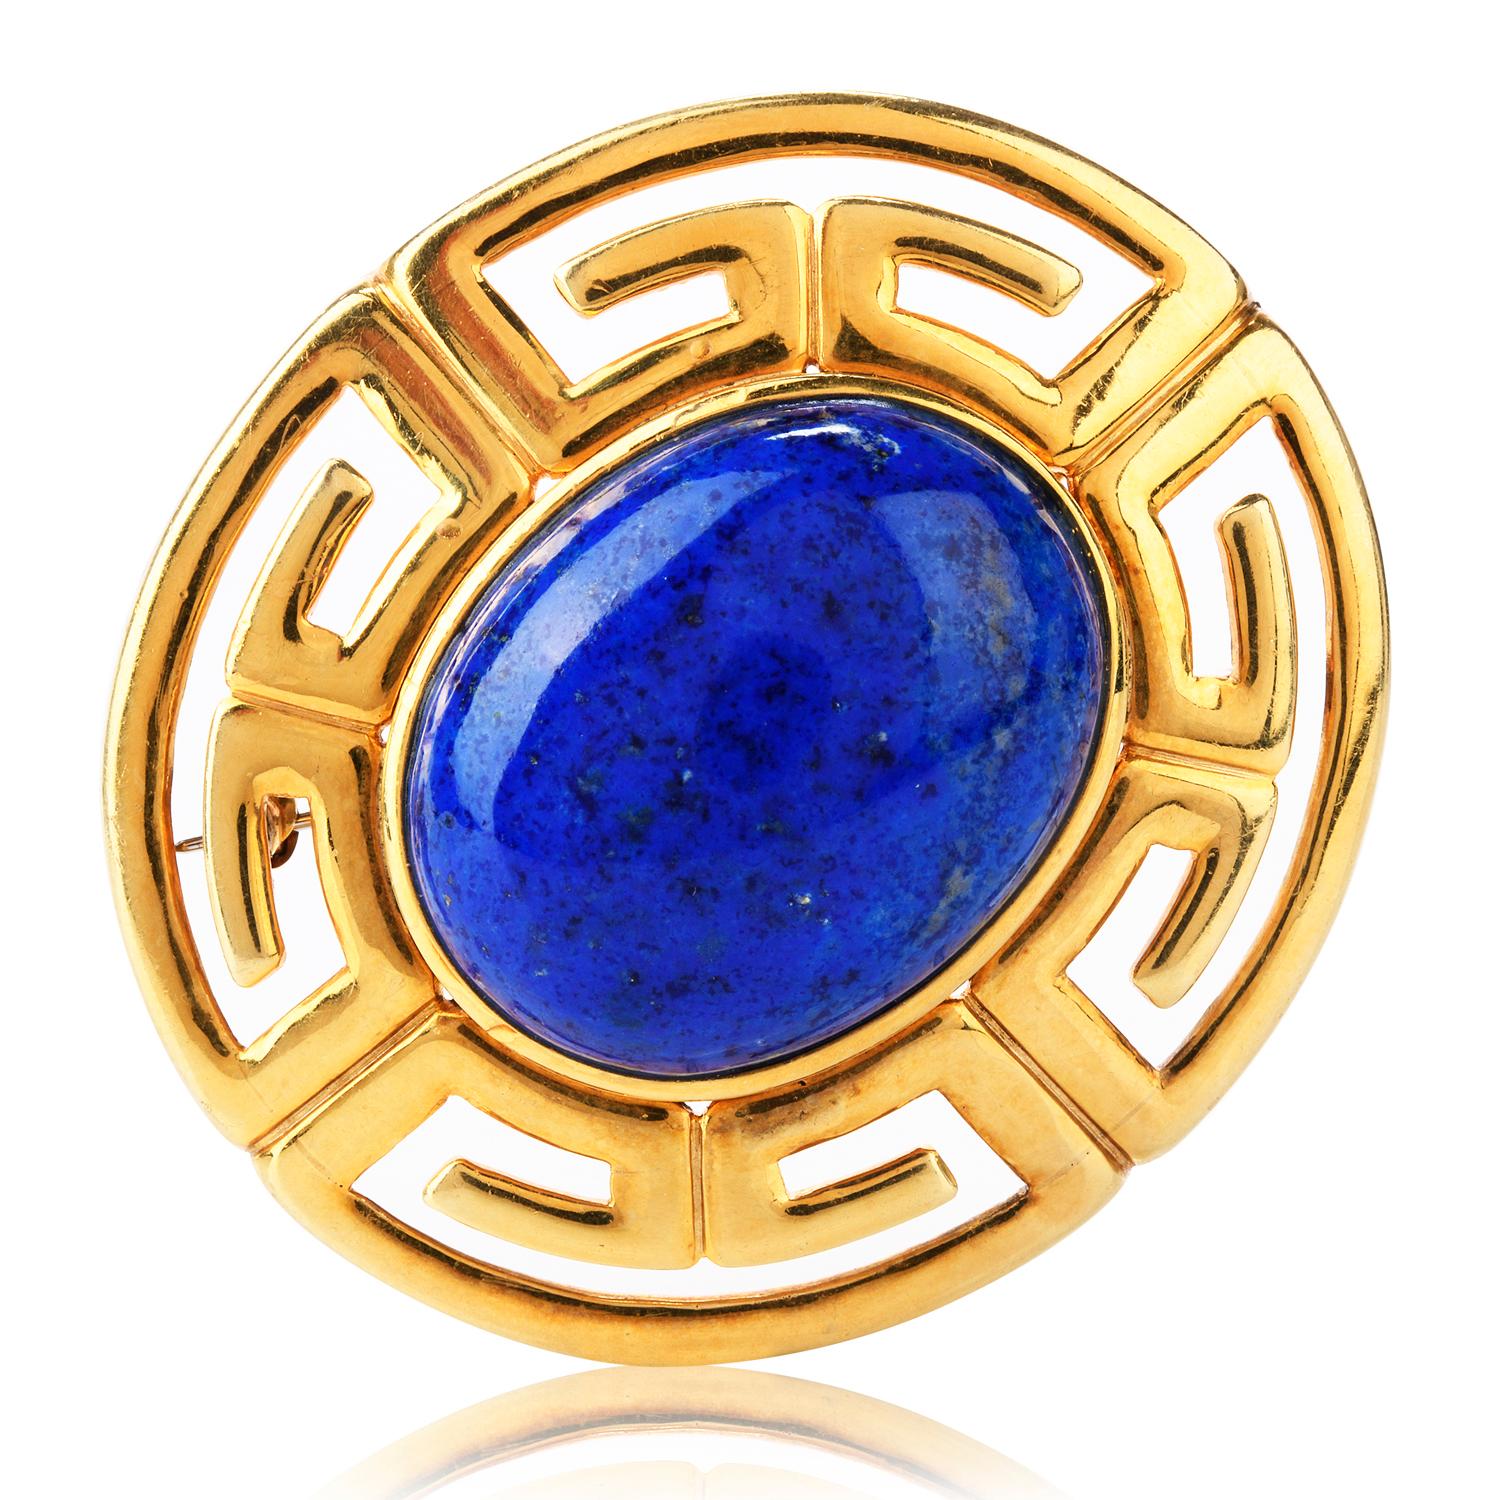 Finish off the look with this Egyptian Styled Lapis Lazuli Brooch Pin crafted in 14K Yellow Gold. The eye of the1970s  vintage brooch is a large oval shaped vibrant blue Lapis

measuring appx. 22 x 28mm.

Weighing appx. 37.6 Grams, this brooch